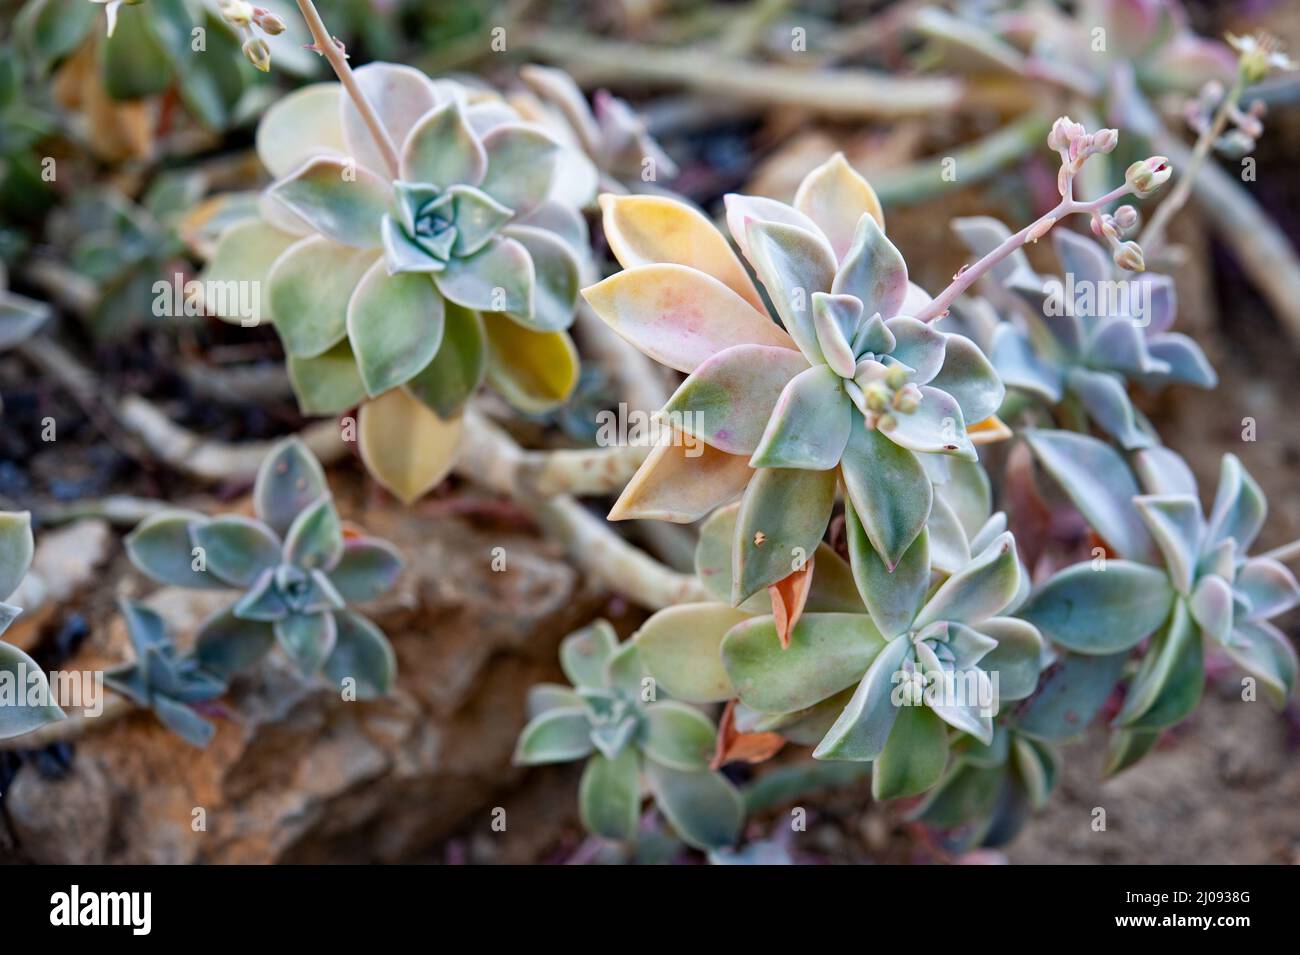 Graptopetalum paraguayense is a species of succulent plant in the jade plant family, Crassulaceae, that is native to Tamaulipas, Mexico.. Stock Photo